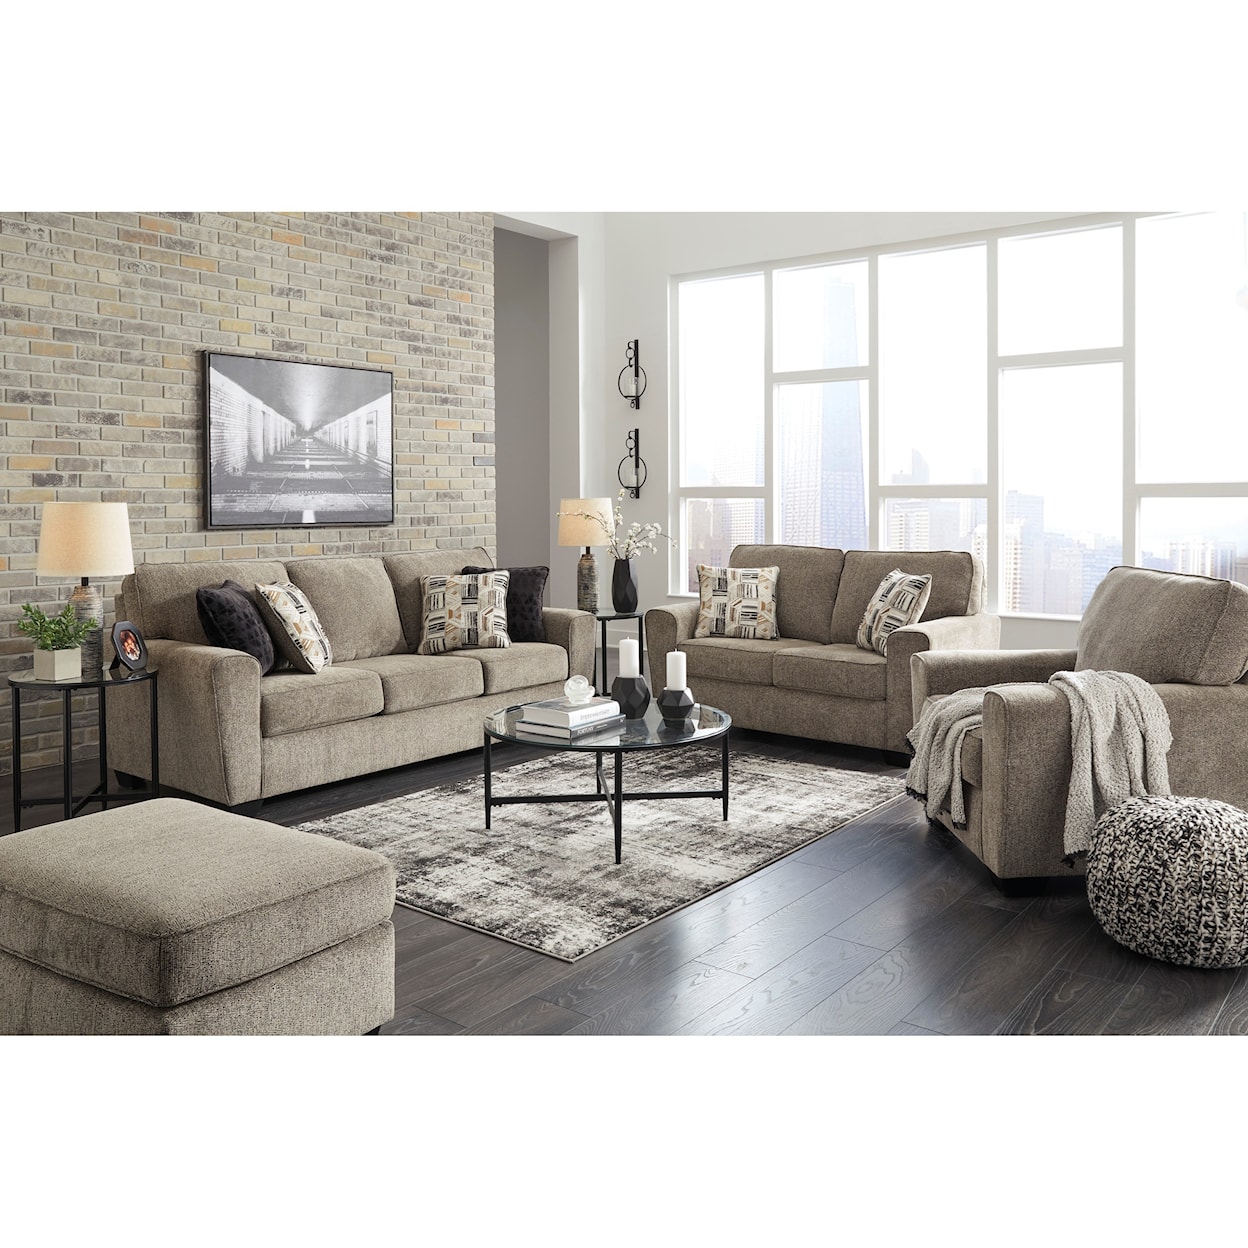 Benchcraft McCluer Living Room Group